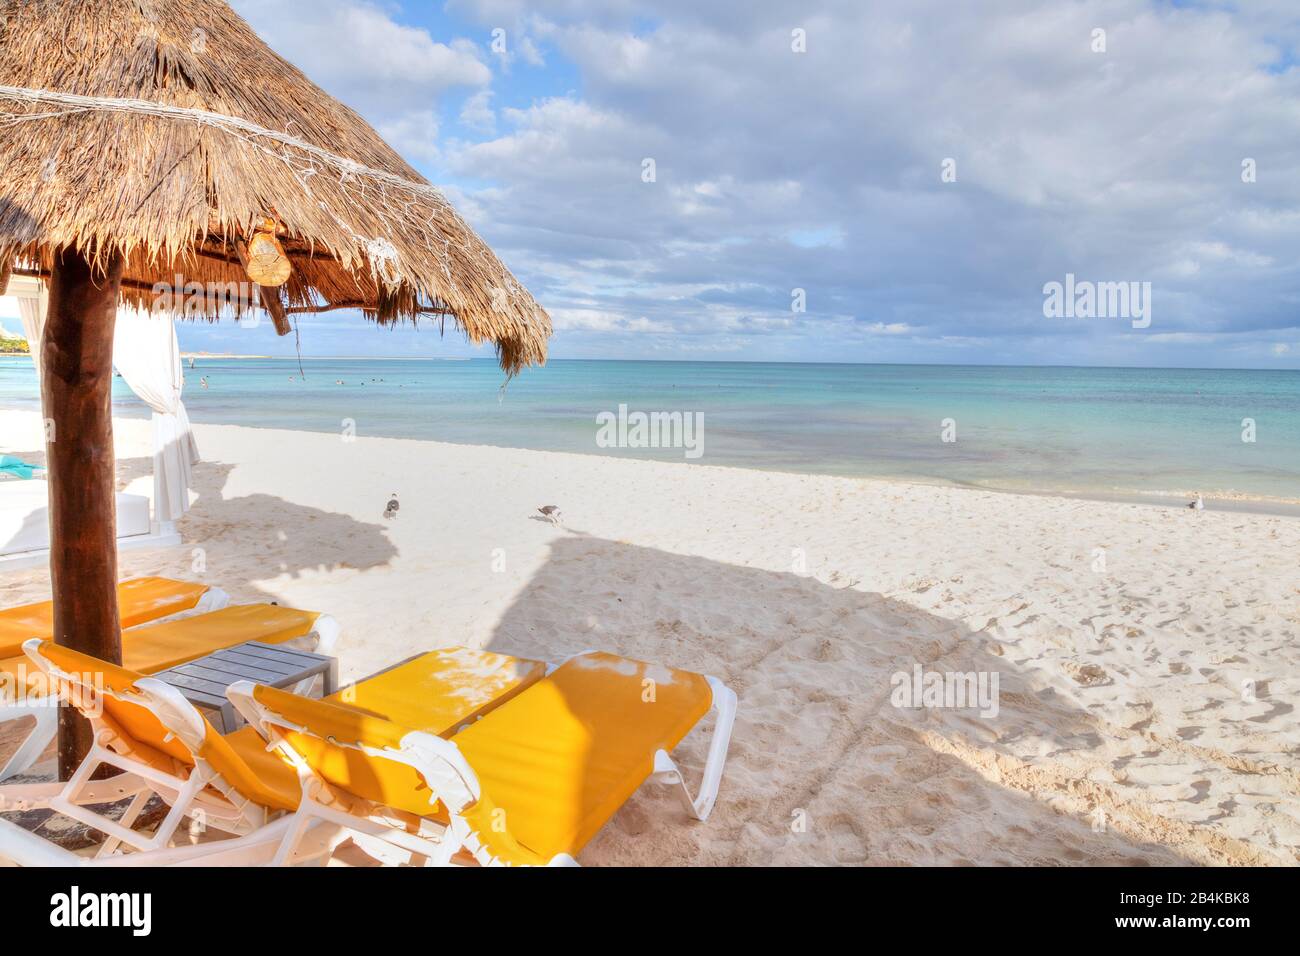 Coconut palm straw beach umbrella and lounge chairs on white sandy beach in Caribbean coast of Riviera Maya, Cancun, Mexico. Stock Photo